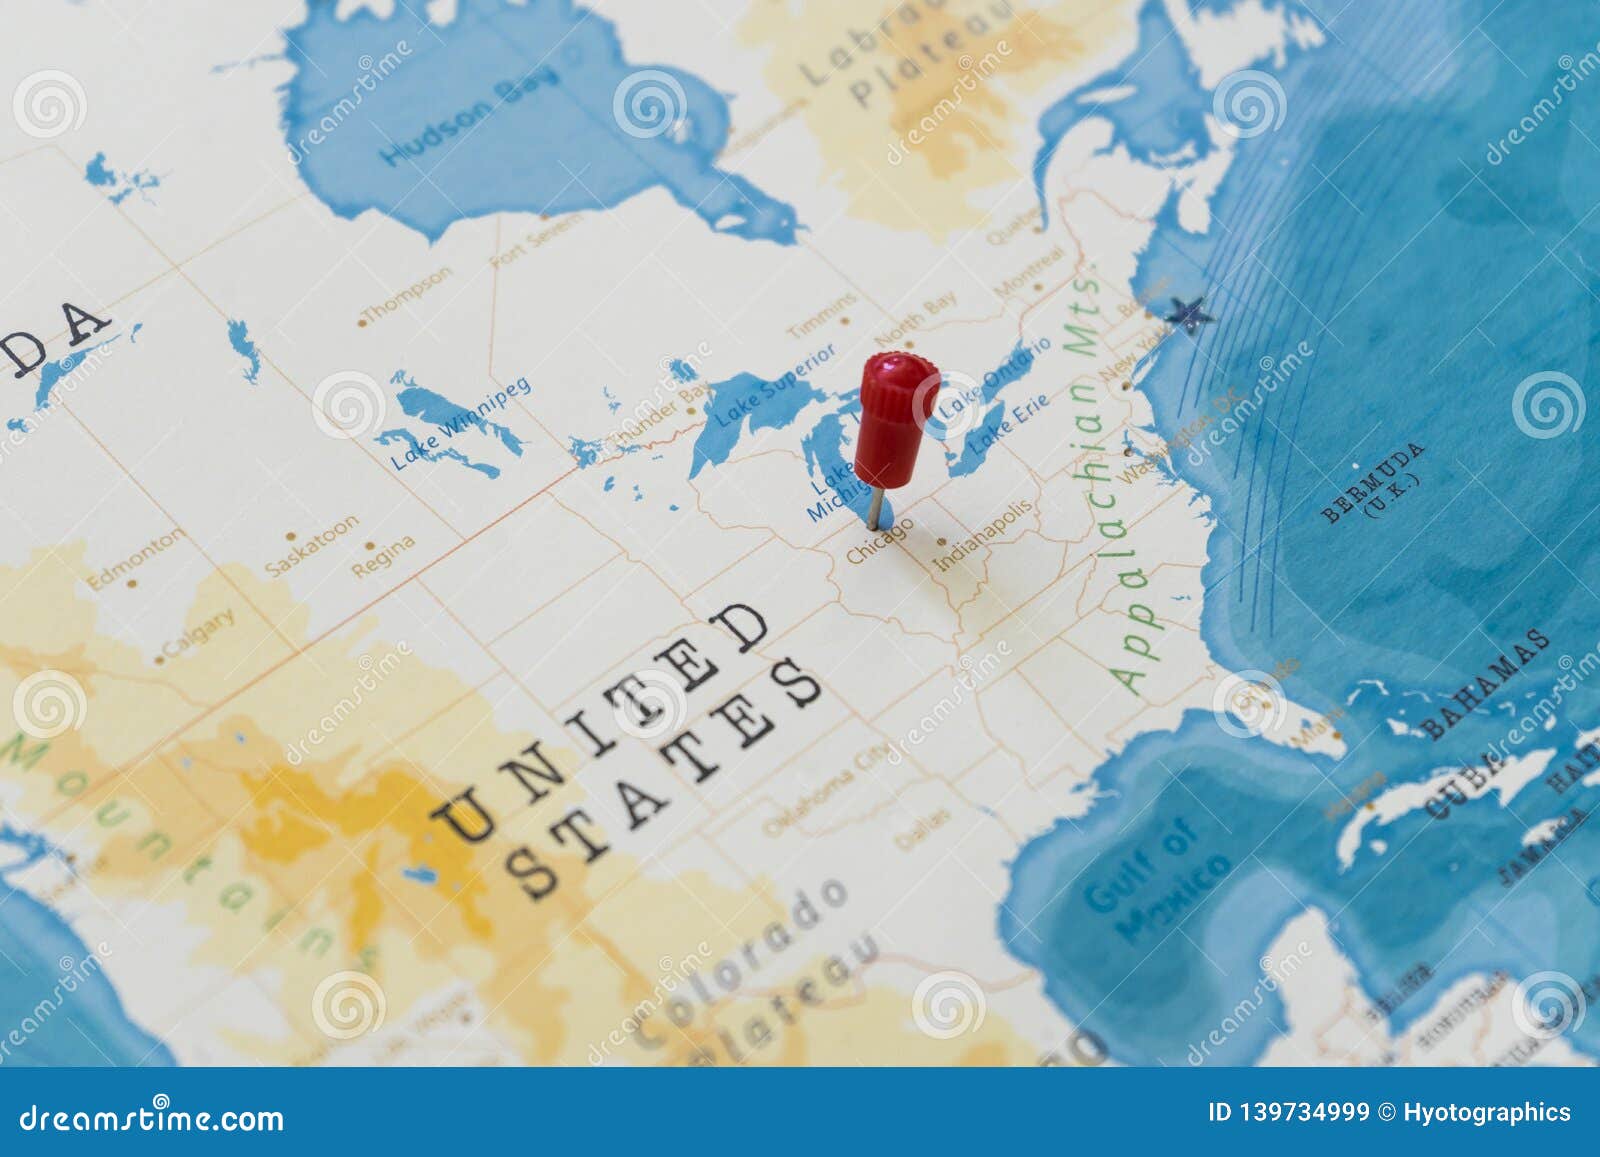 A Pin On Chicago United States In The World Map Stock Image